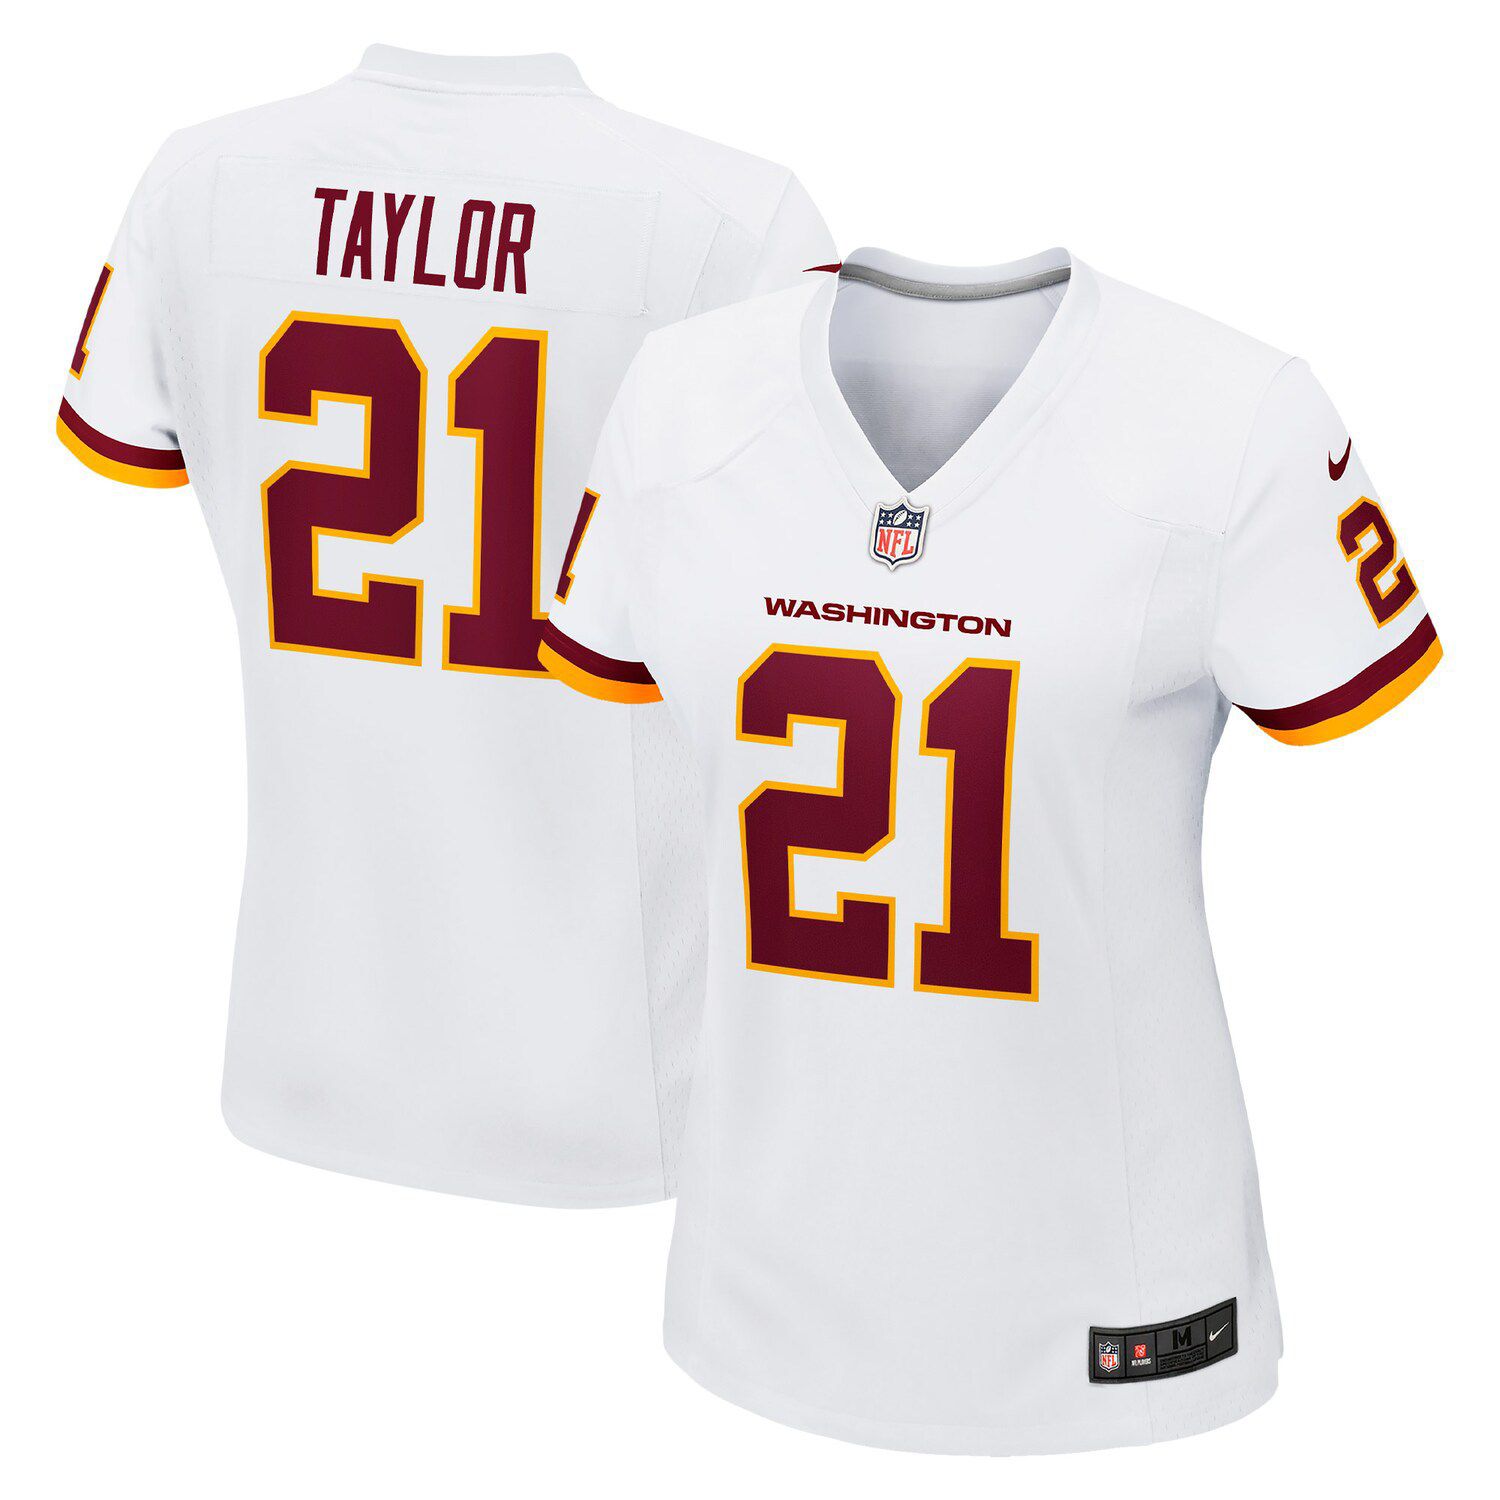 Taylor Darrell home jersey